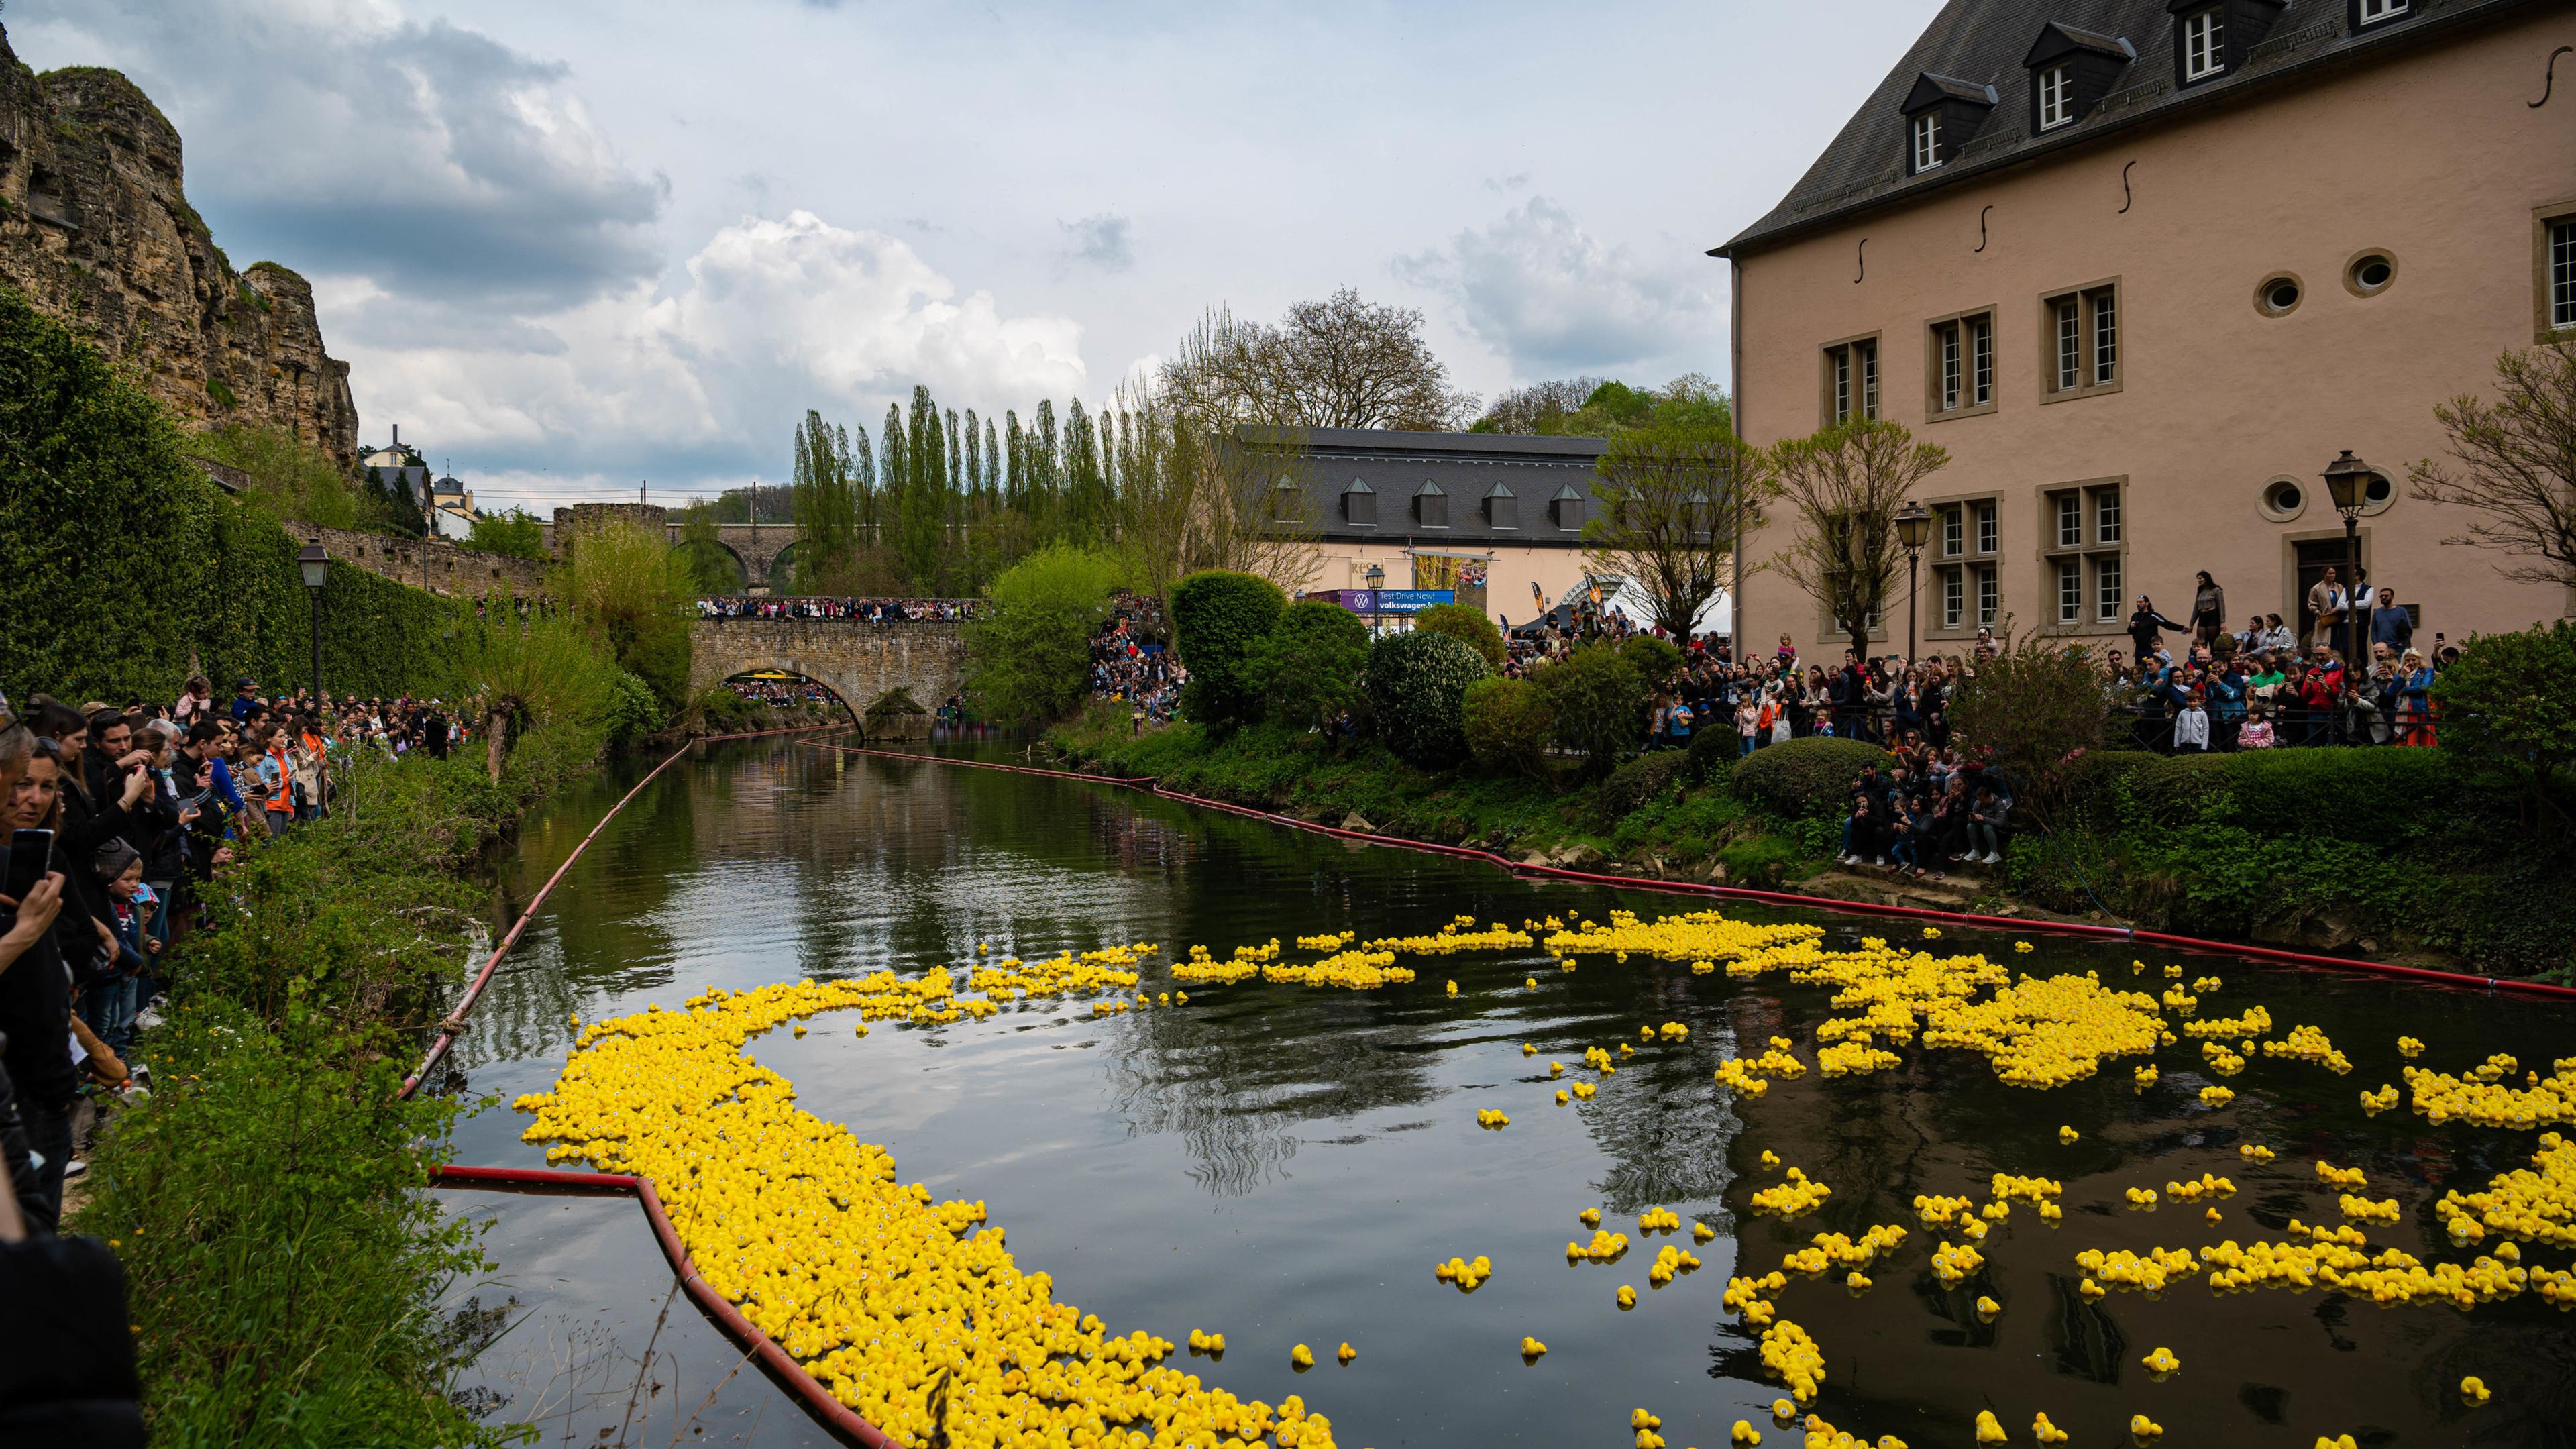 16 000 ducks will float down the River Alzette on Saturday 29 April 